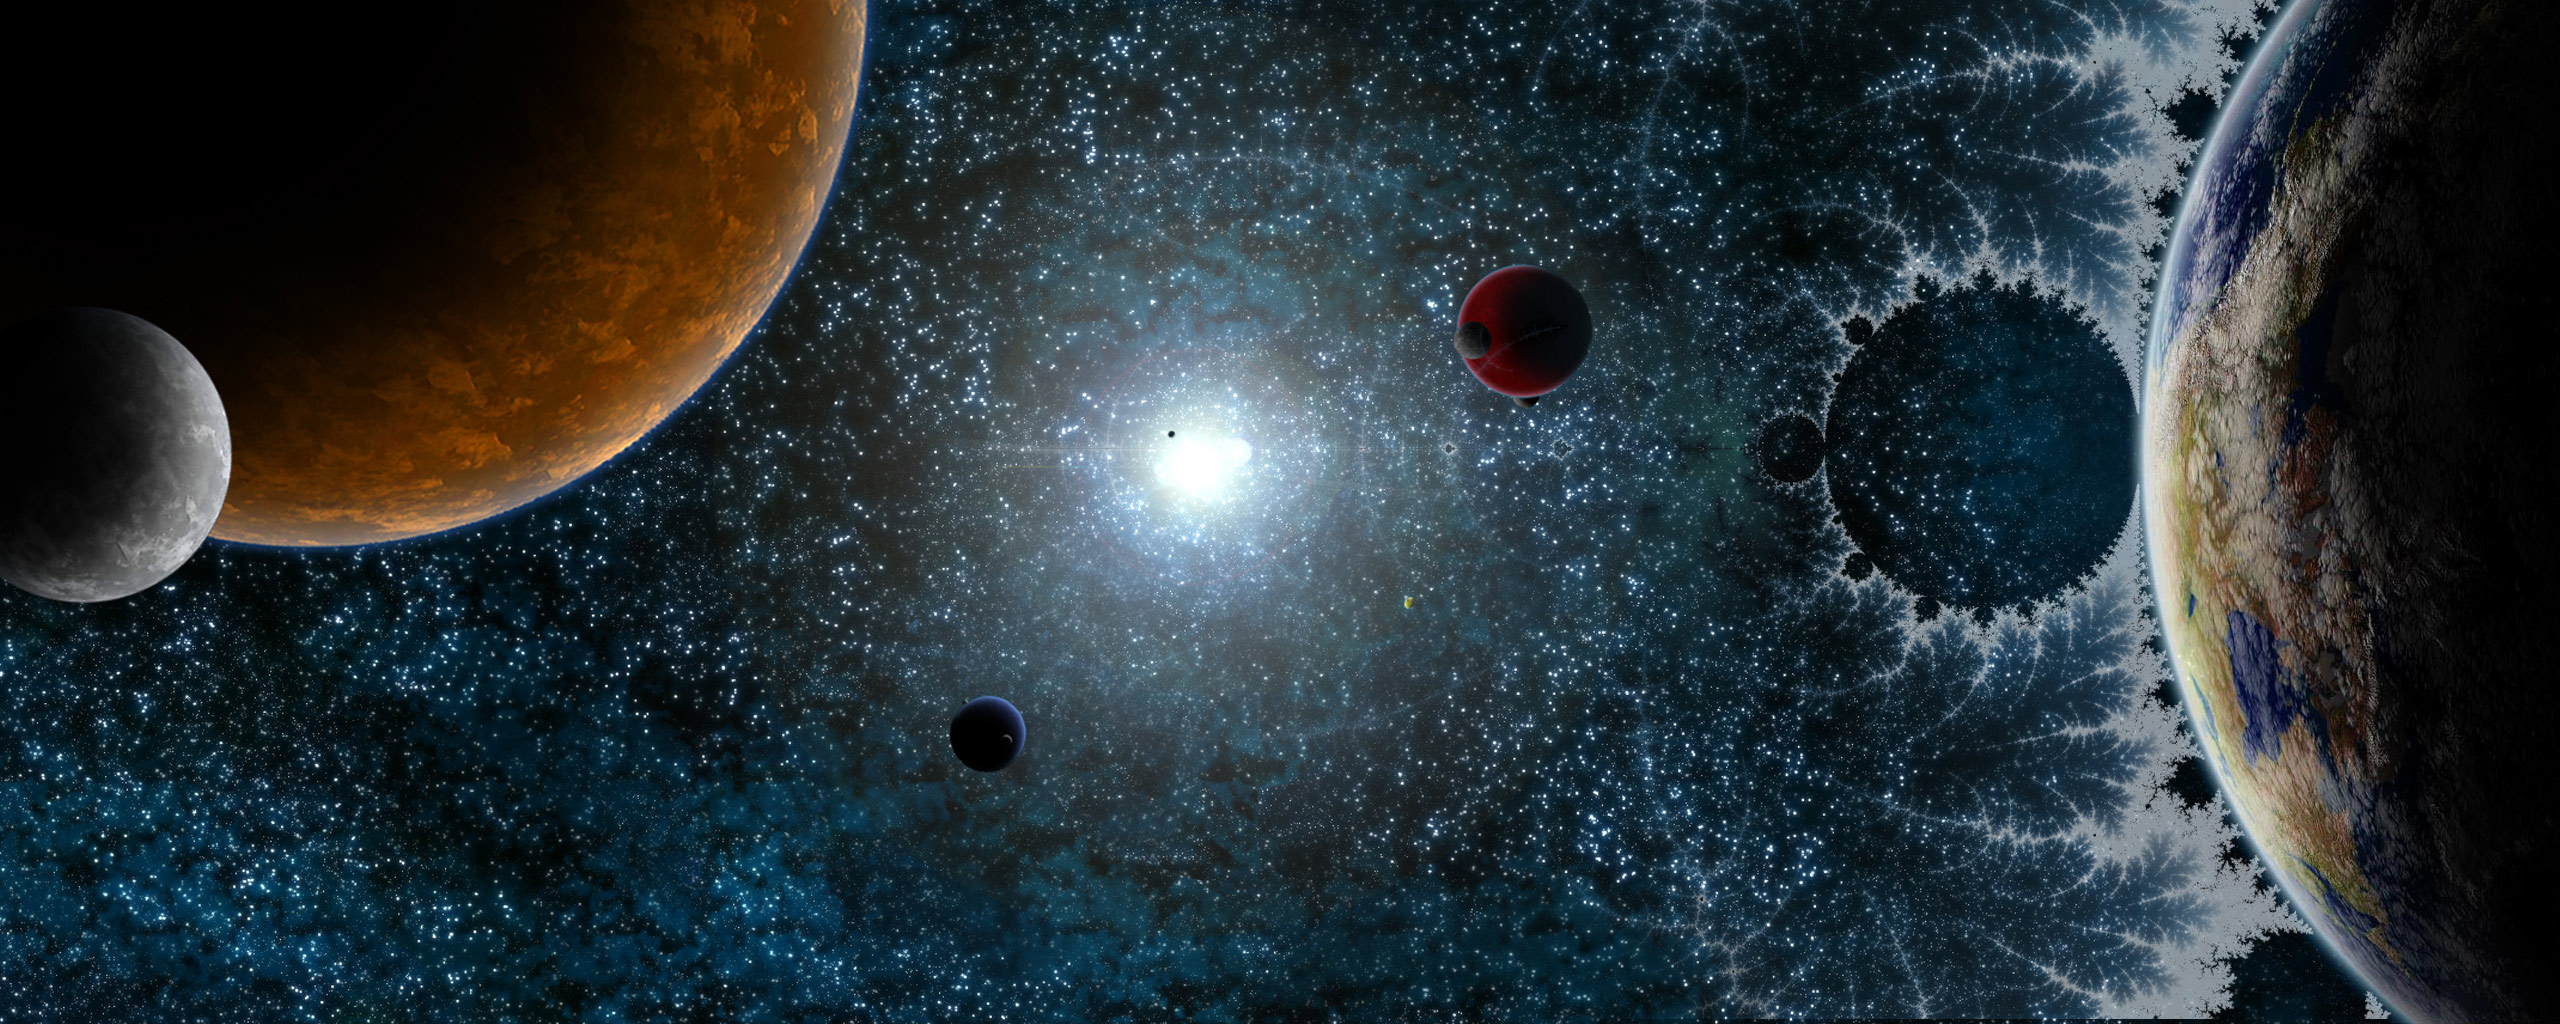 HD wallpaper featuring a space planet